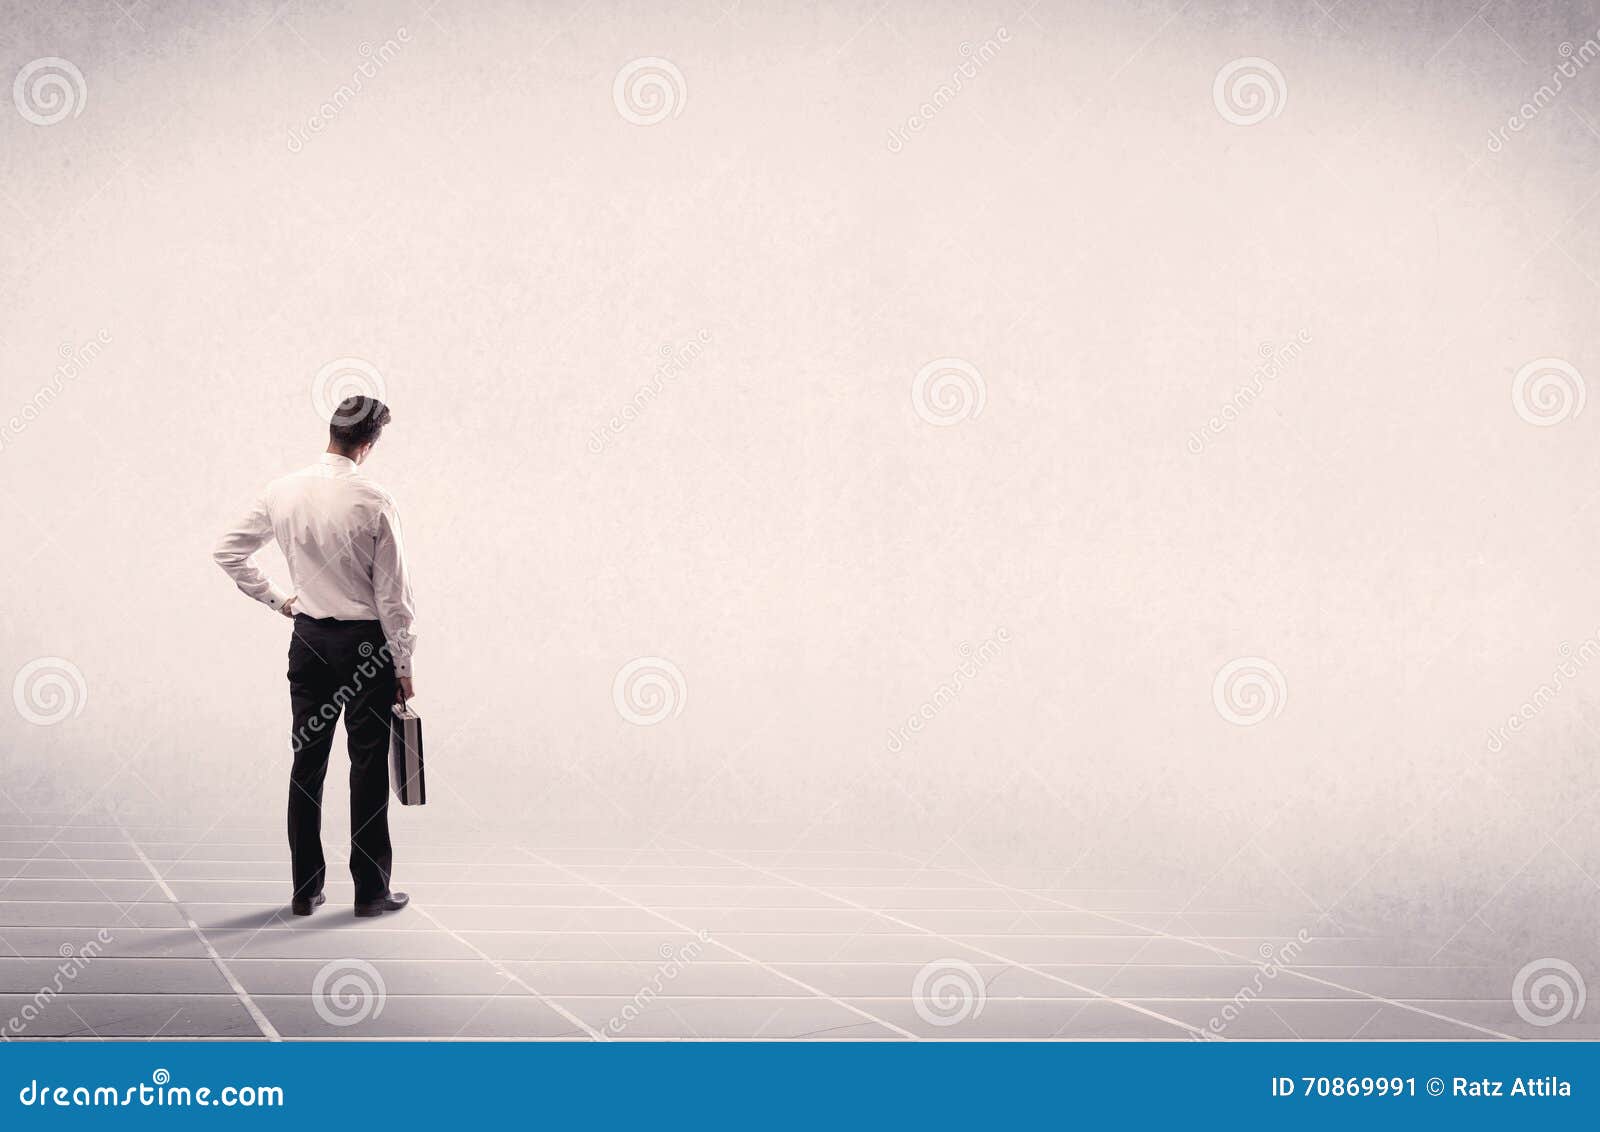 Business Person Standing in Empty Space Stock Image - Image of ...